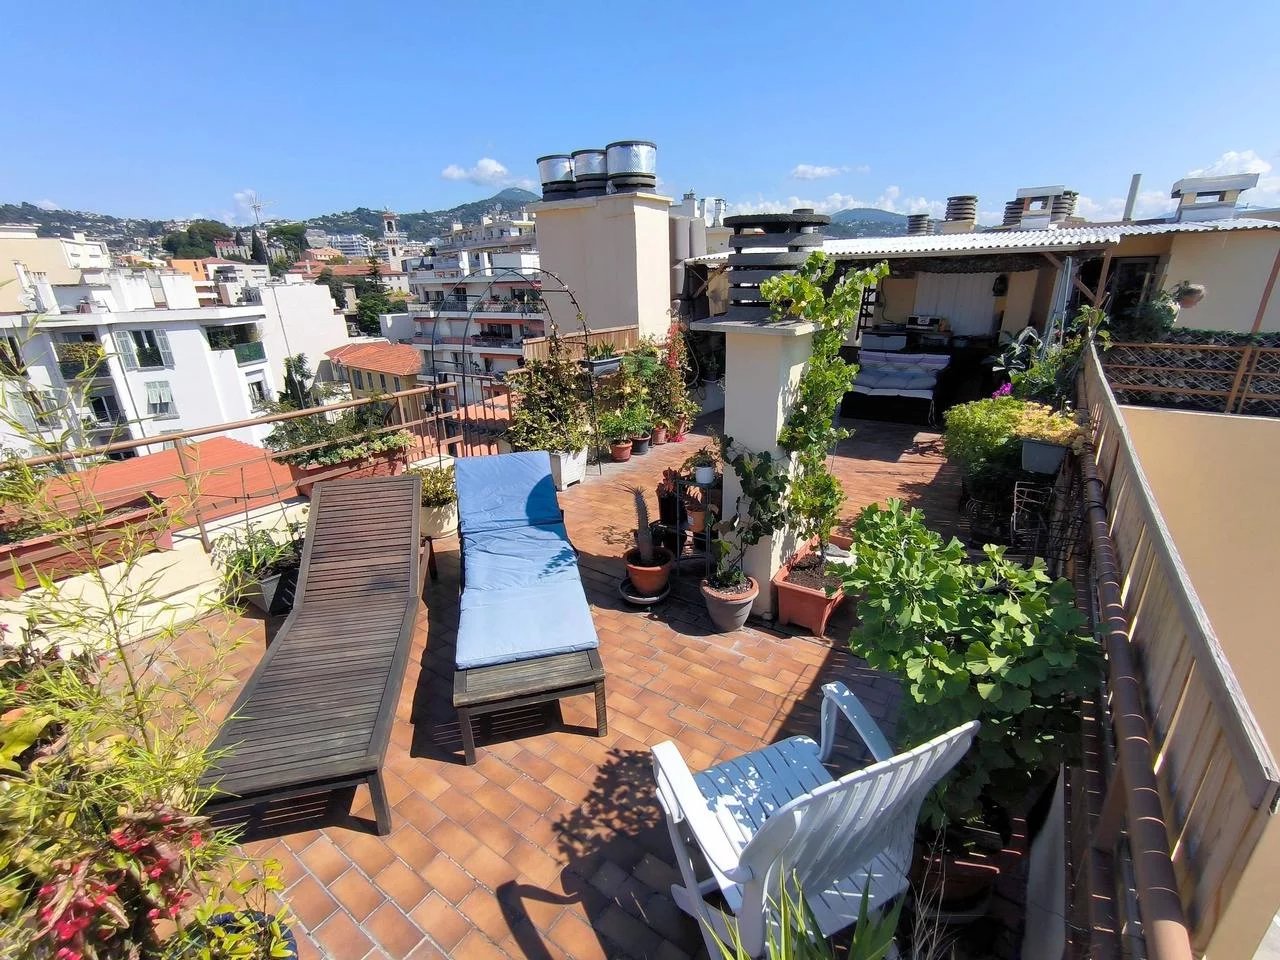 Appartement  4 Rooms 94.03m2  for sale   670 000 €